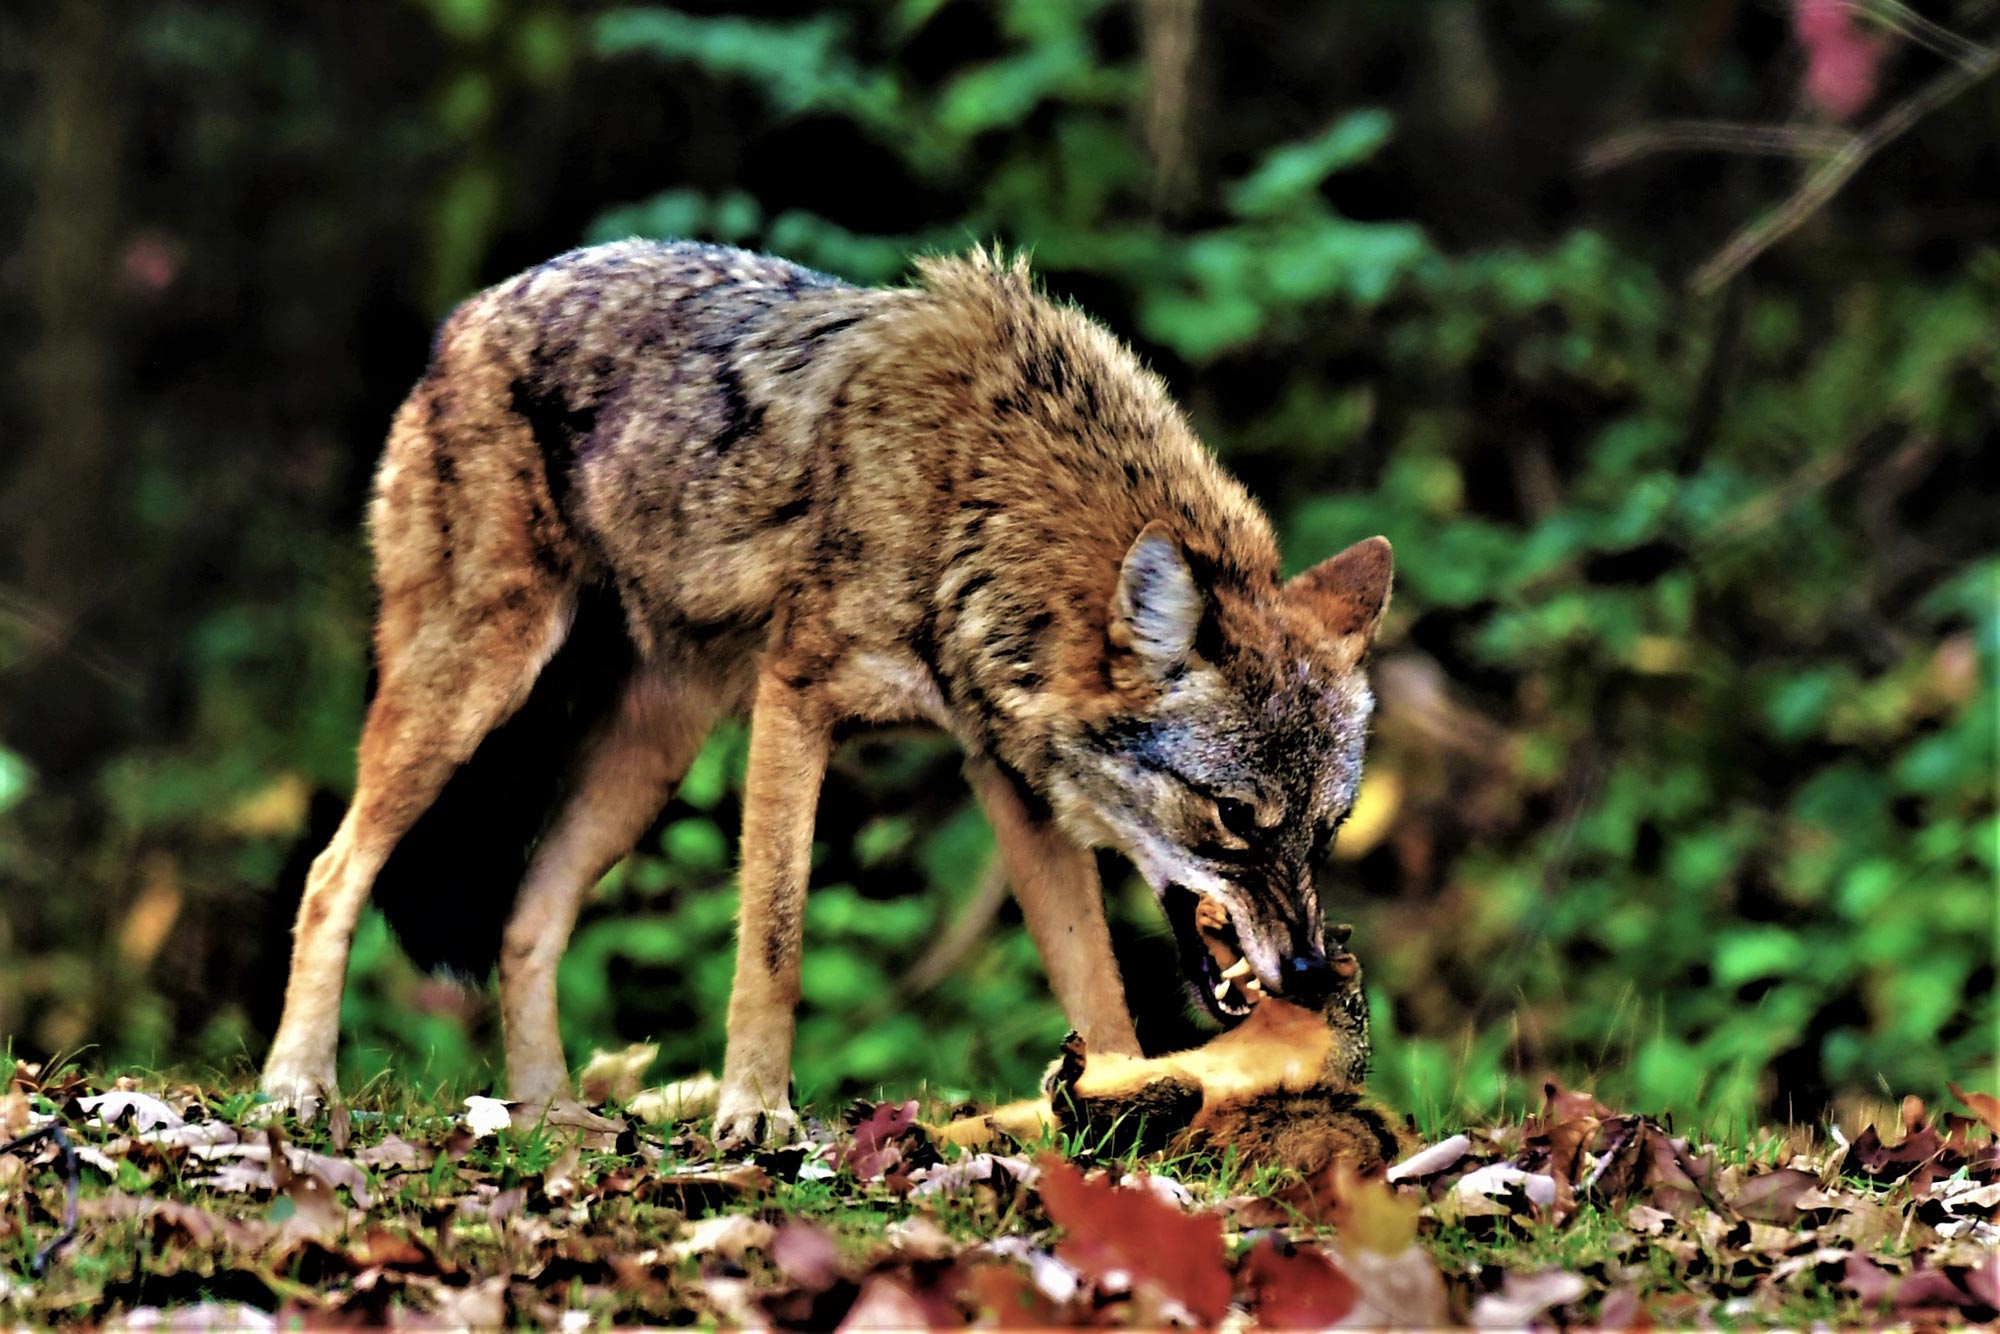 A coyote showing its teeth while eating a squirrel.